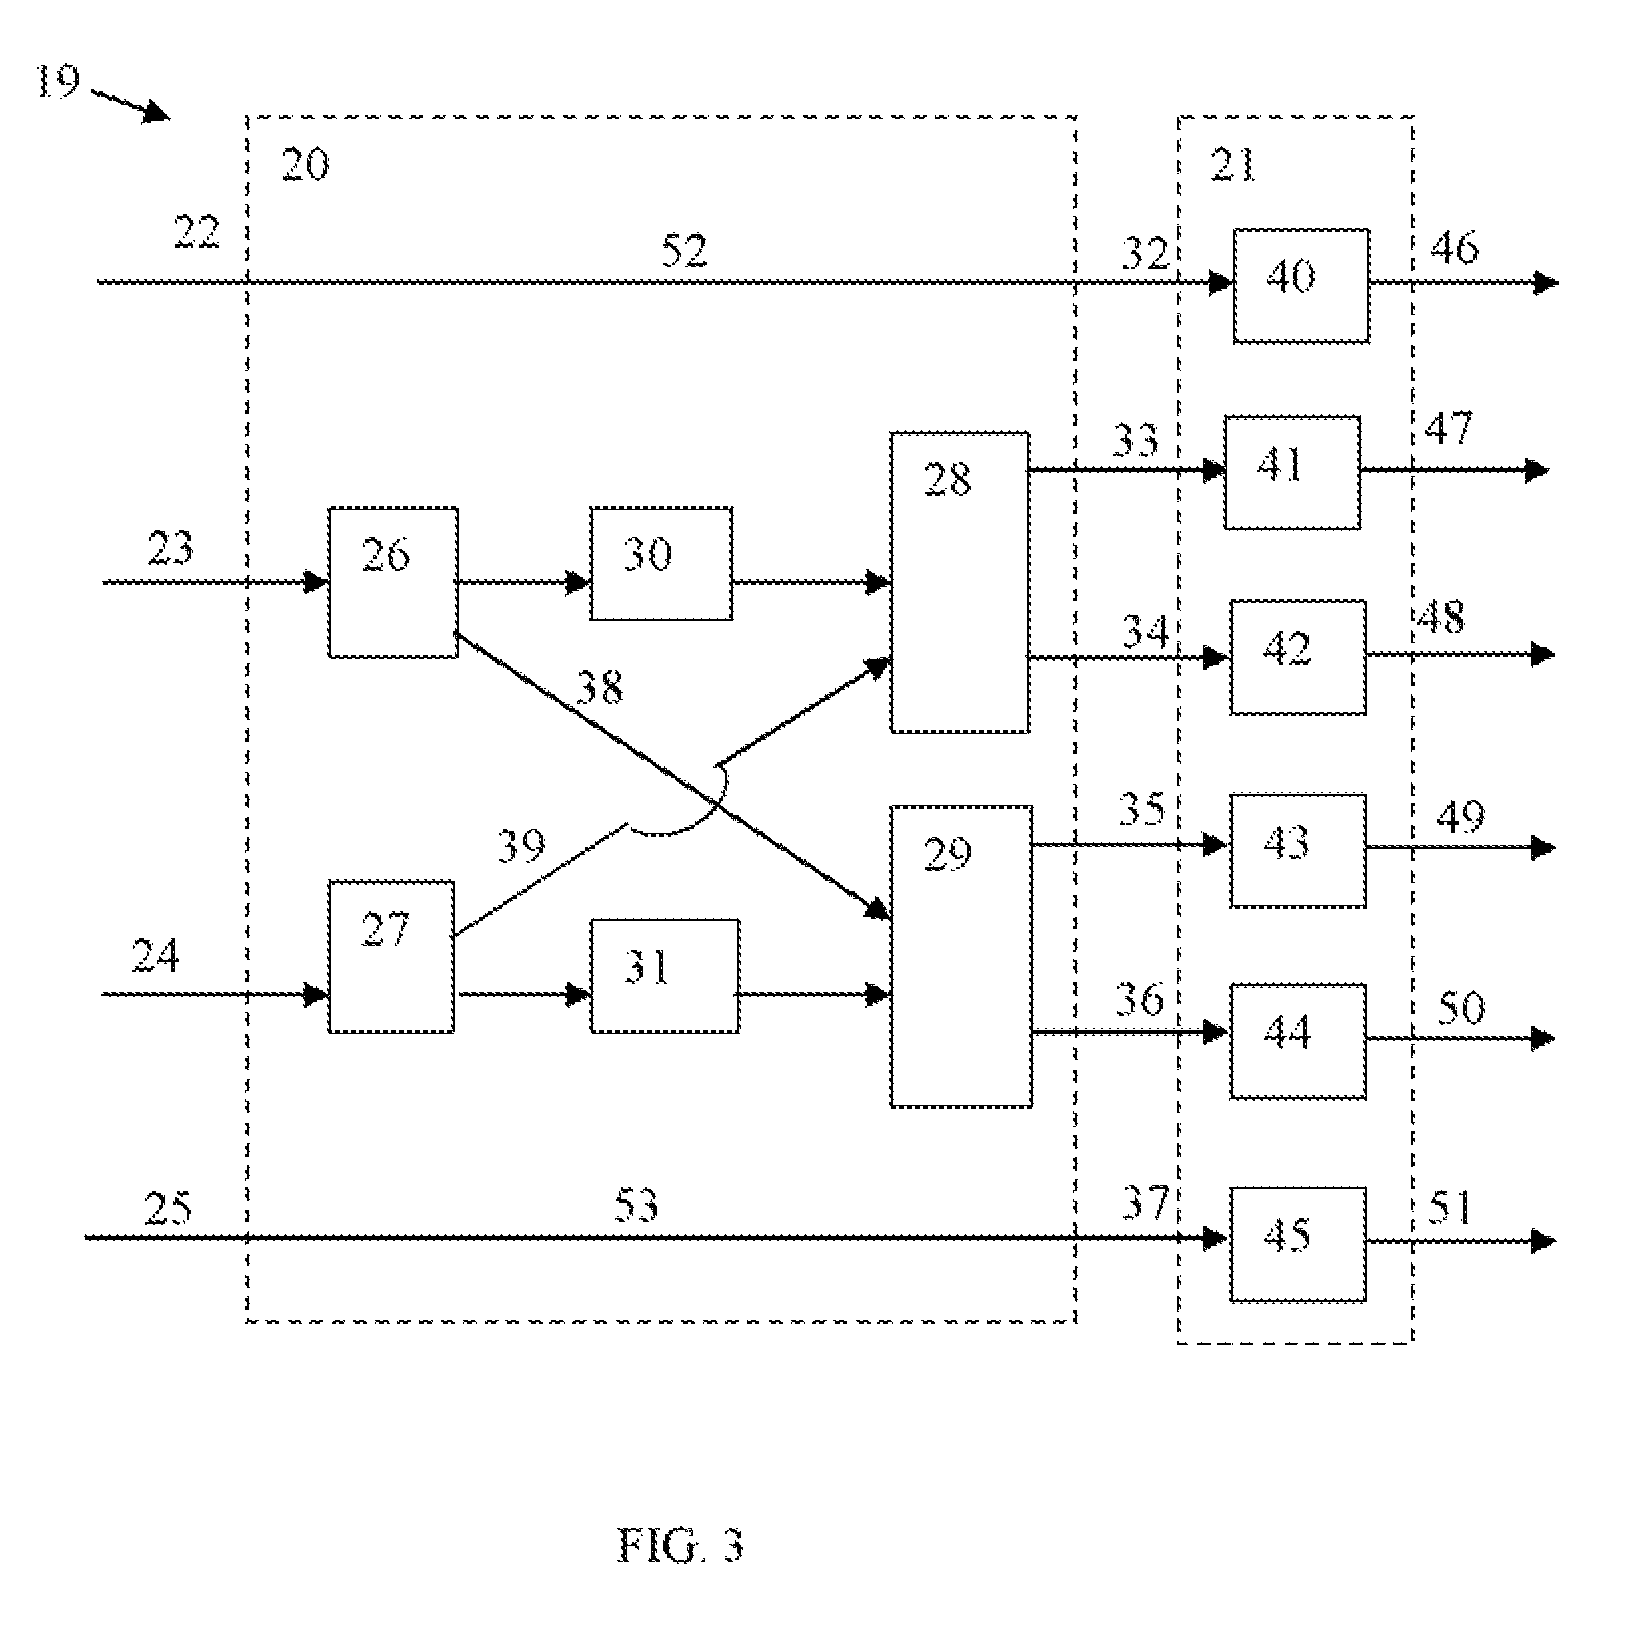 Integrated coherent optical detector